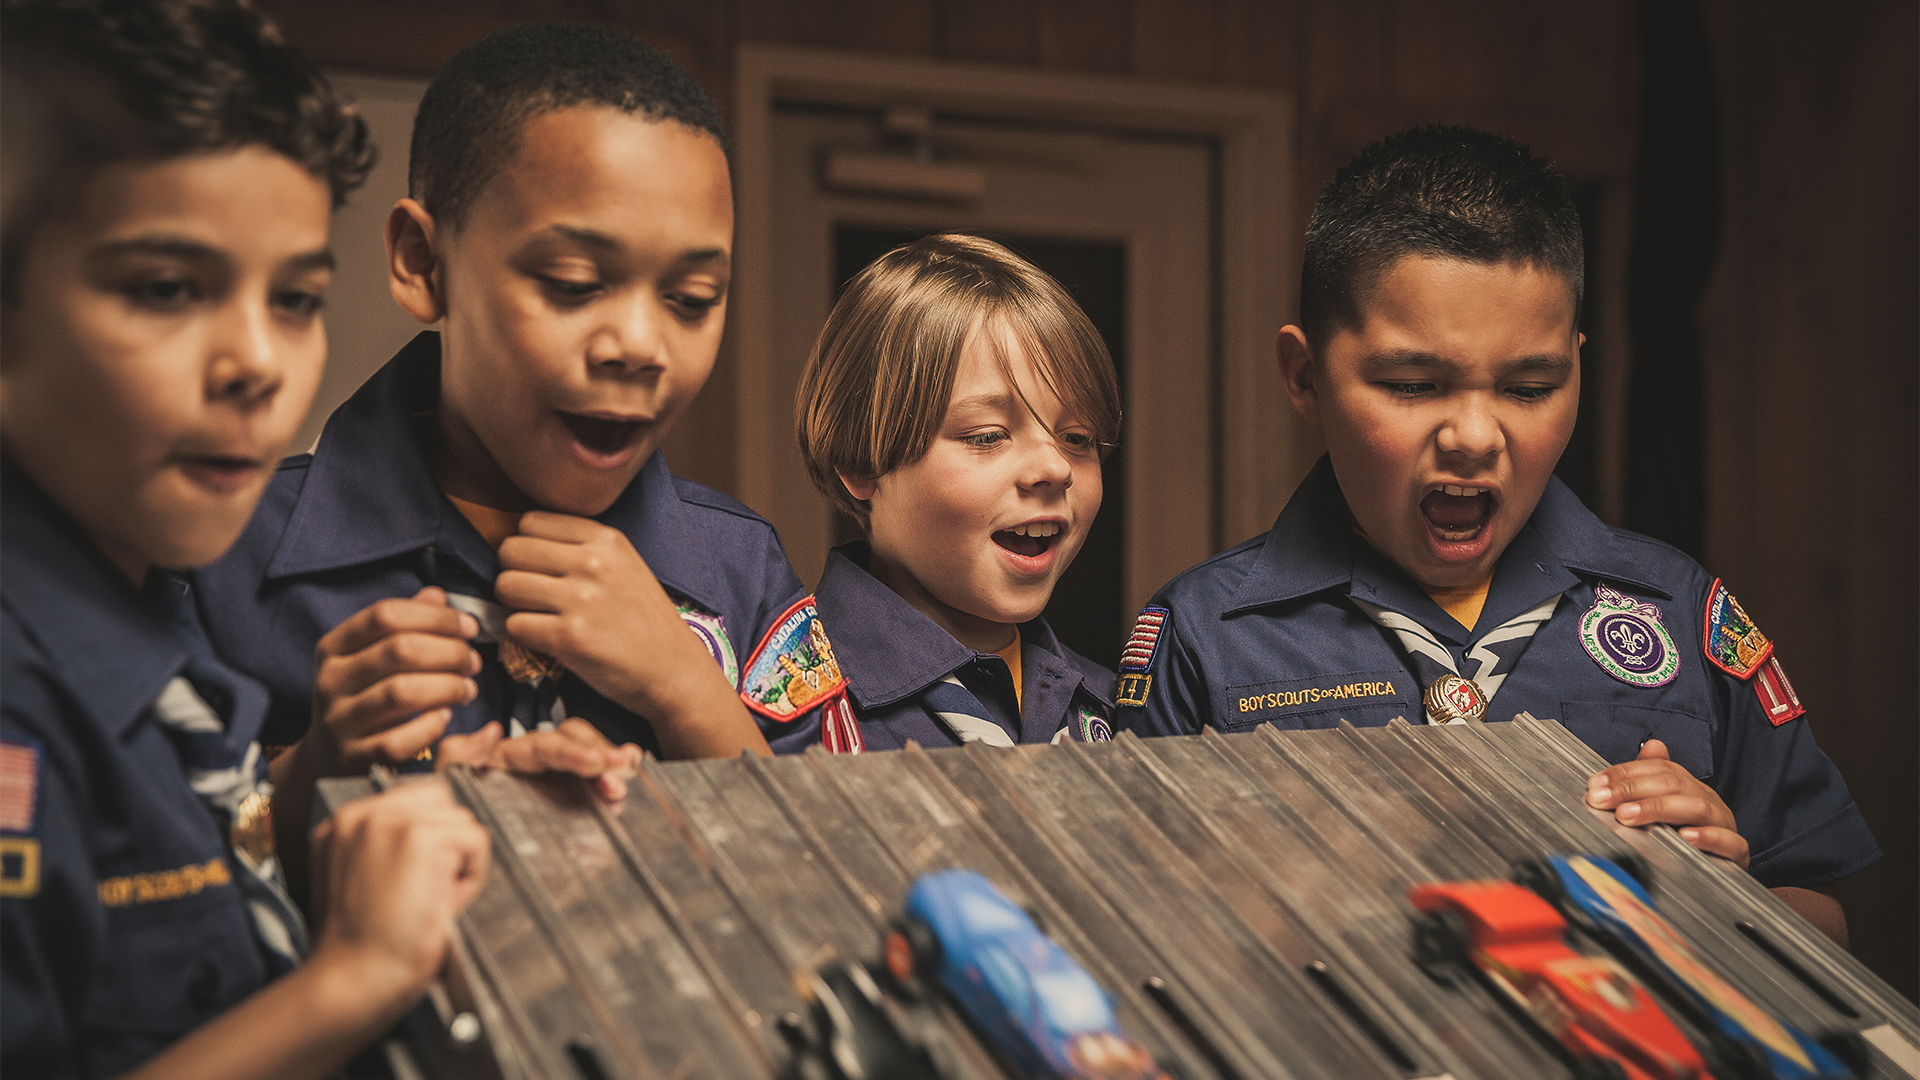 A group of Scouts cheering at several Pinewood Derby cars lined up to race down the track.